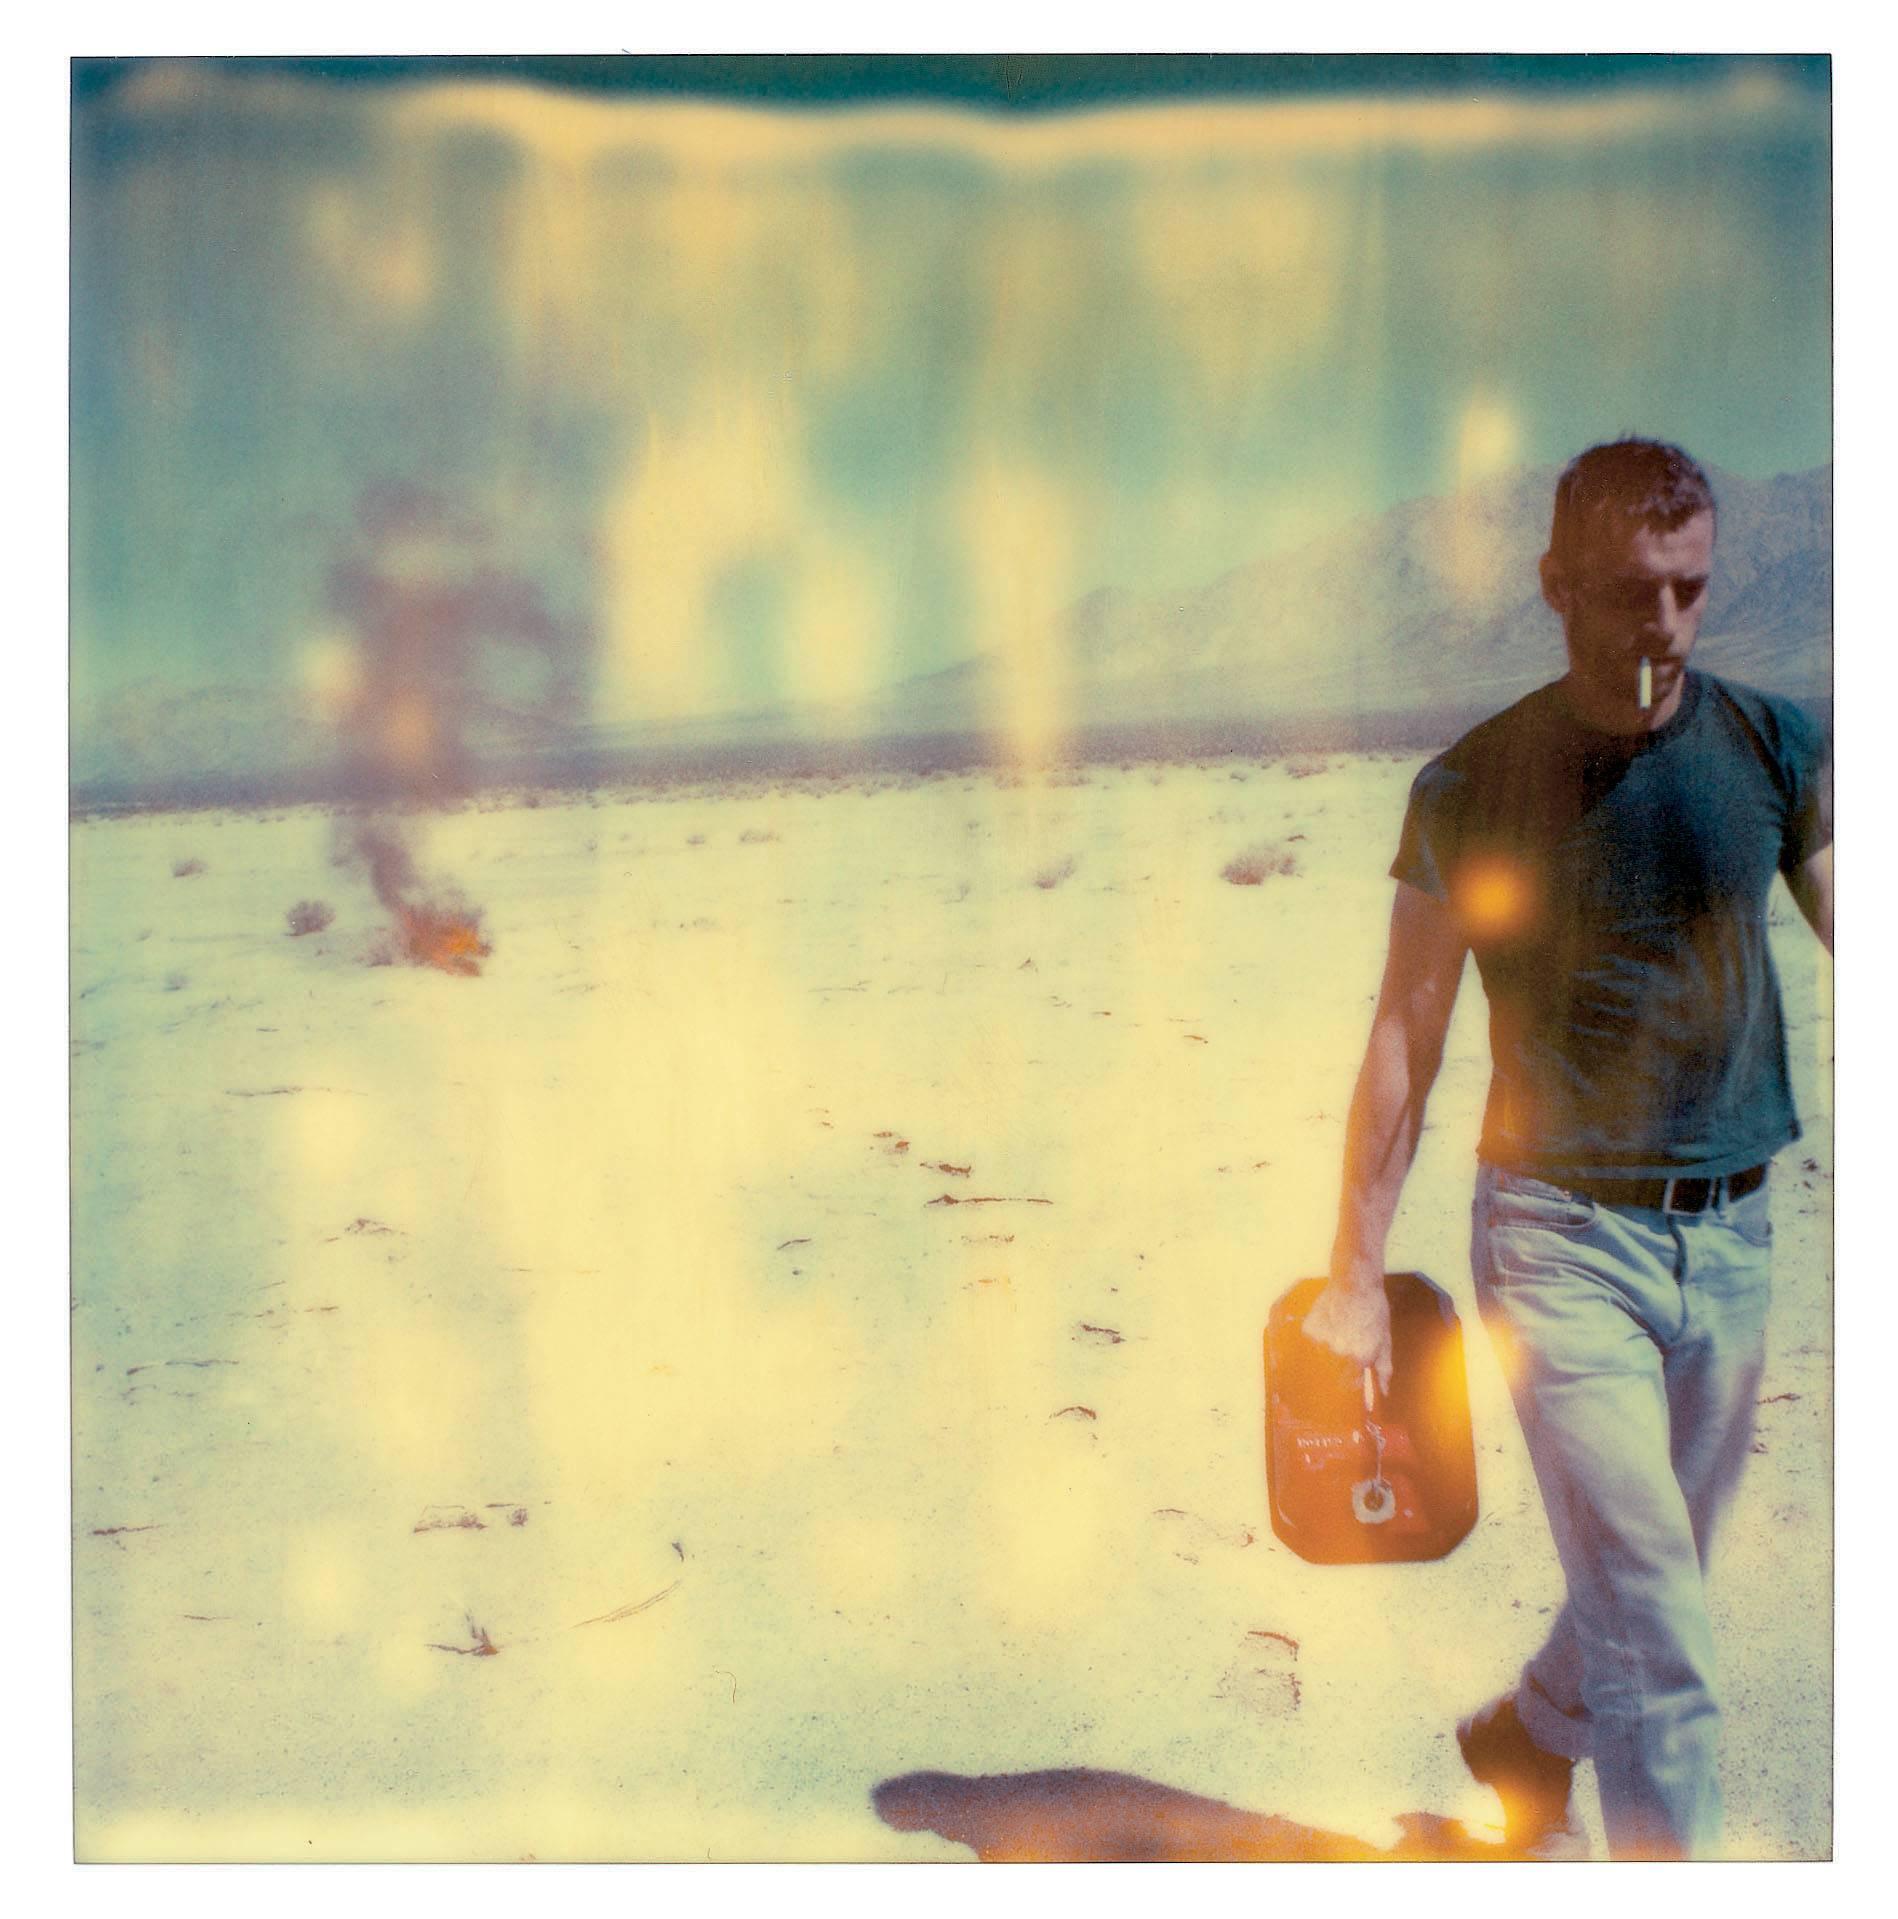 Gasoline II (Stranger than Paradise) 1999 - 

3 pieces, each 50x50cm, installed 50x170cm including gaps. 
sold out Edition of 150, Artist Proof 4/5. 
Archival C-Prints, based on 3 Polaroids. 
Certificate and Signature label. 
Artist Inventory No.